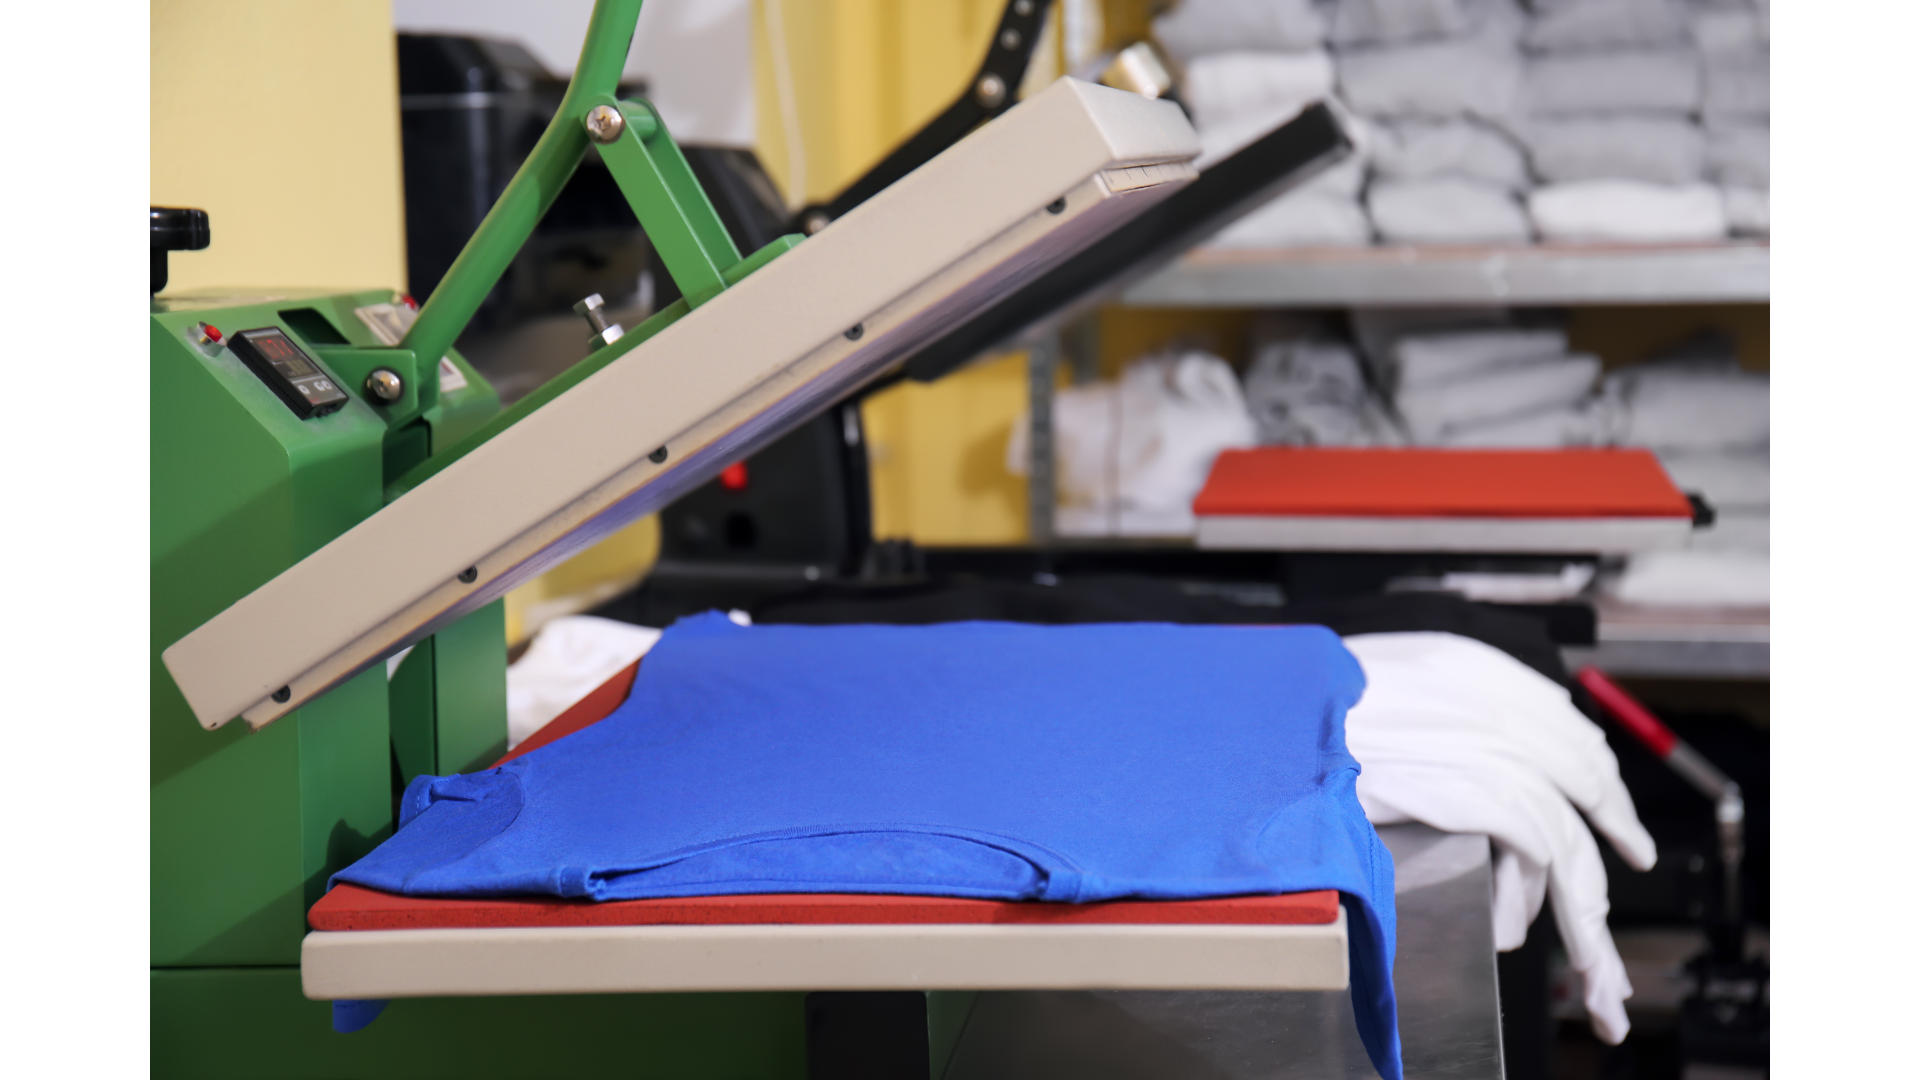 Why Custom One Is Best Choice for Same Day T-Shirt & Screen Printing Services? Check 5 Good Reasons